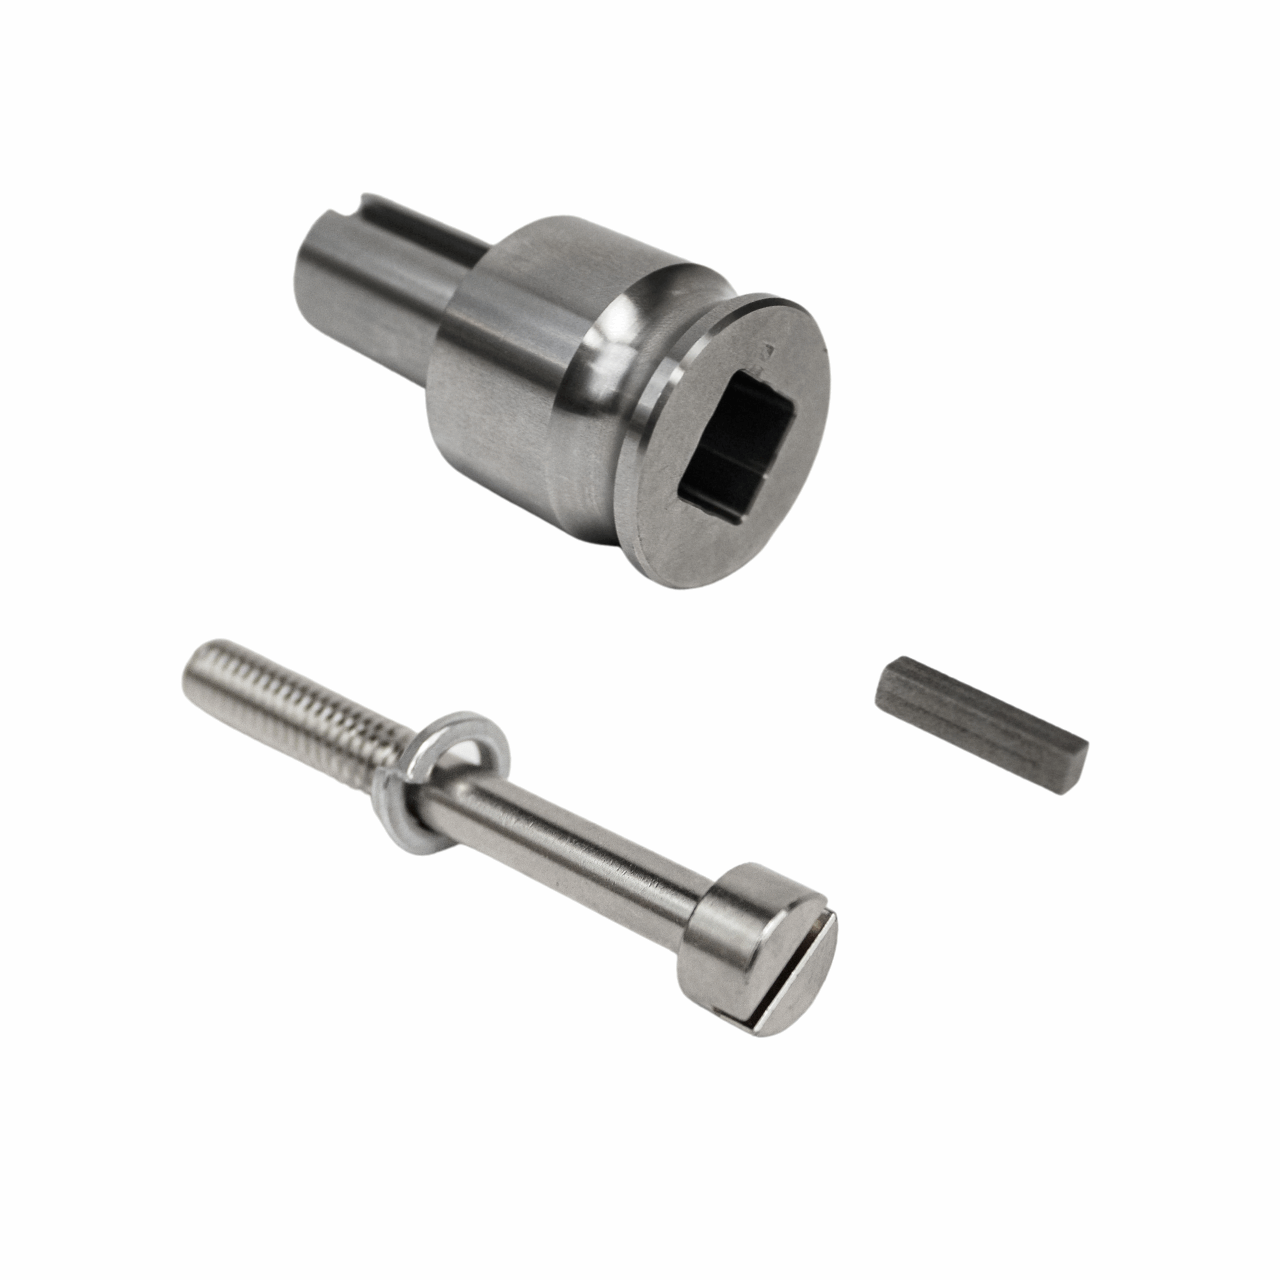 Square Drive, Key and LH Special Screw Kit Fitting Hobart Mixers H600 and L800 Series